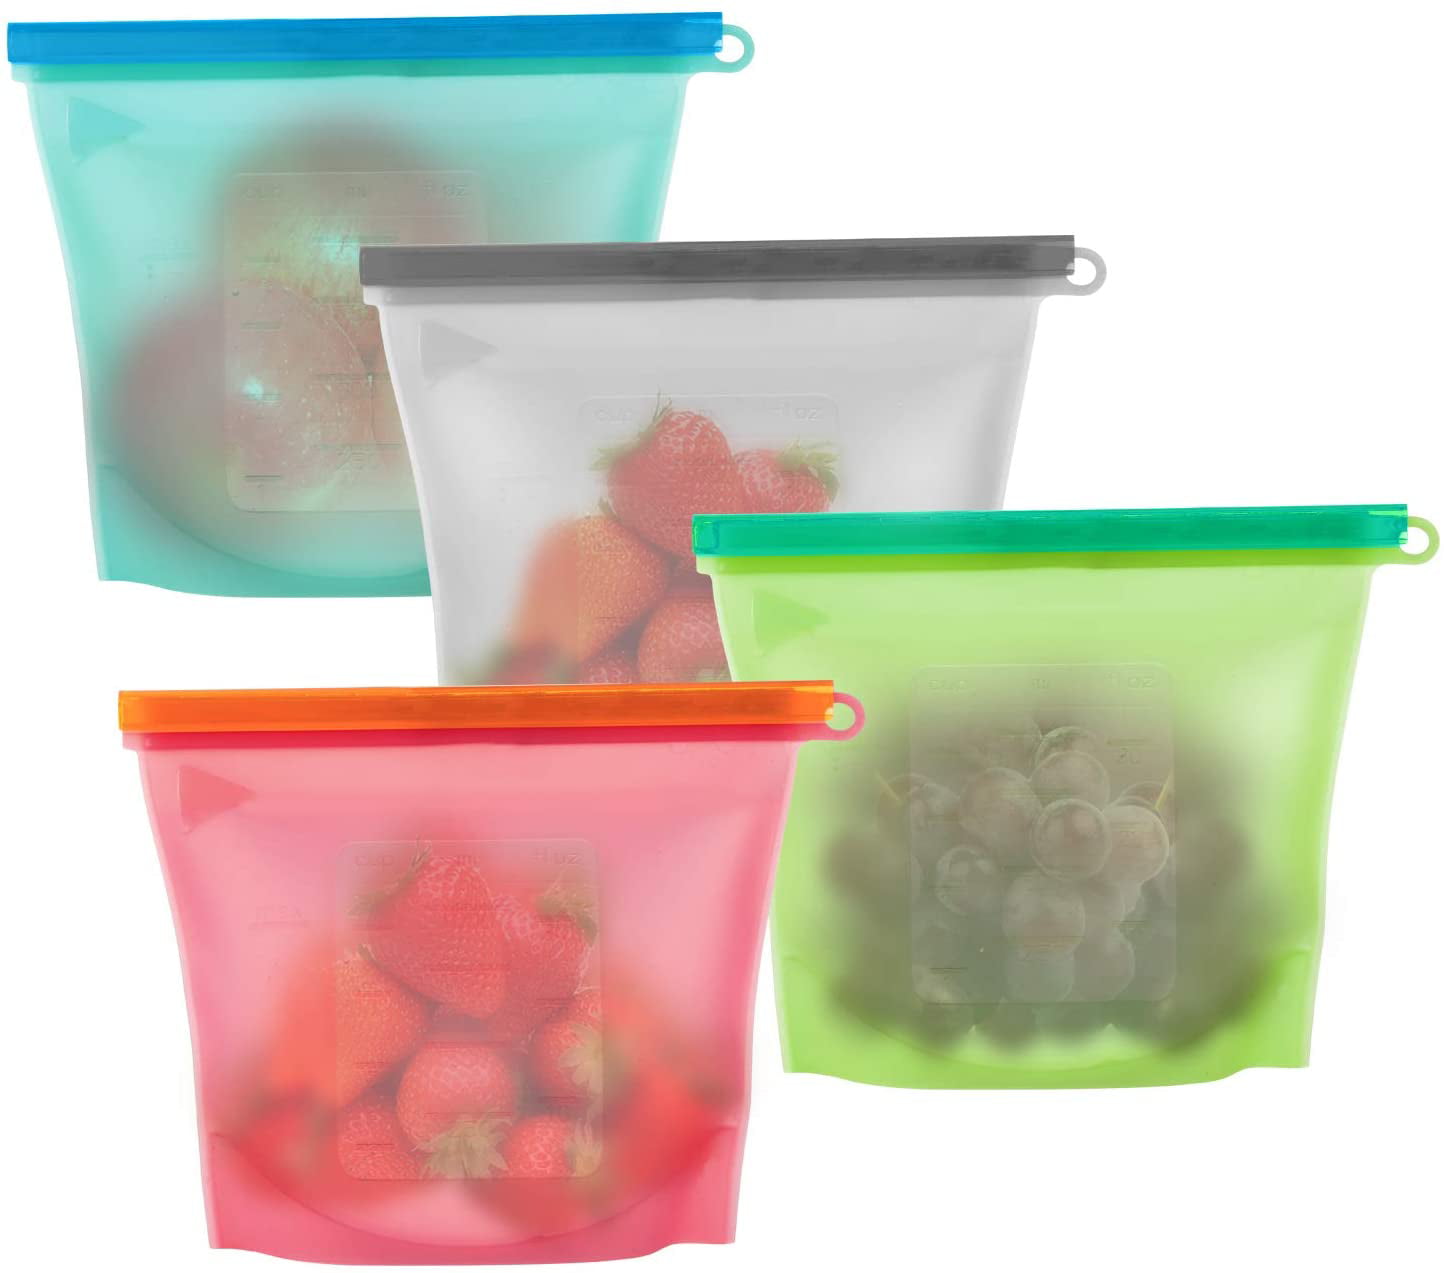 4pcs Silicone Food Storage Reusable Leakproof Containers Sealer Bag Vacuum Seal. 